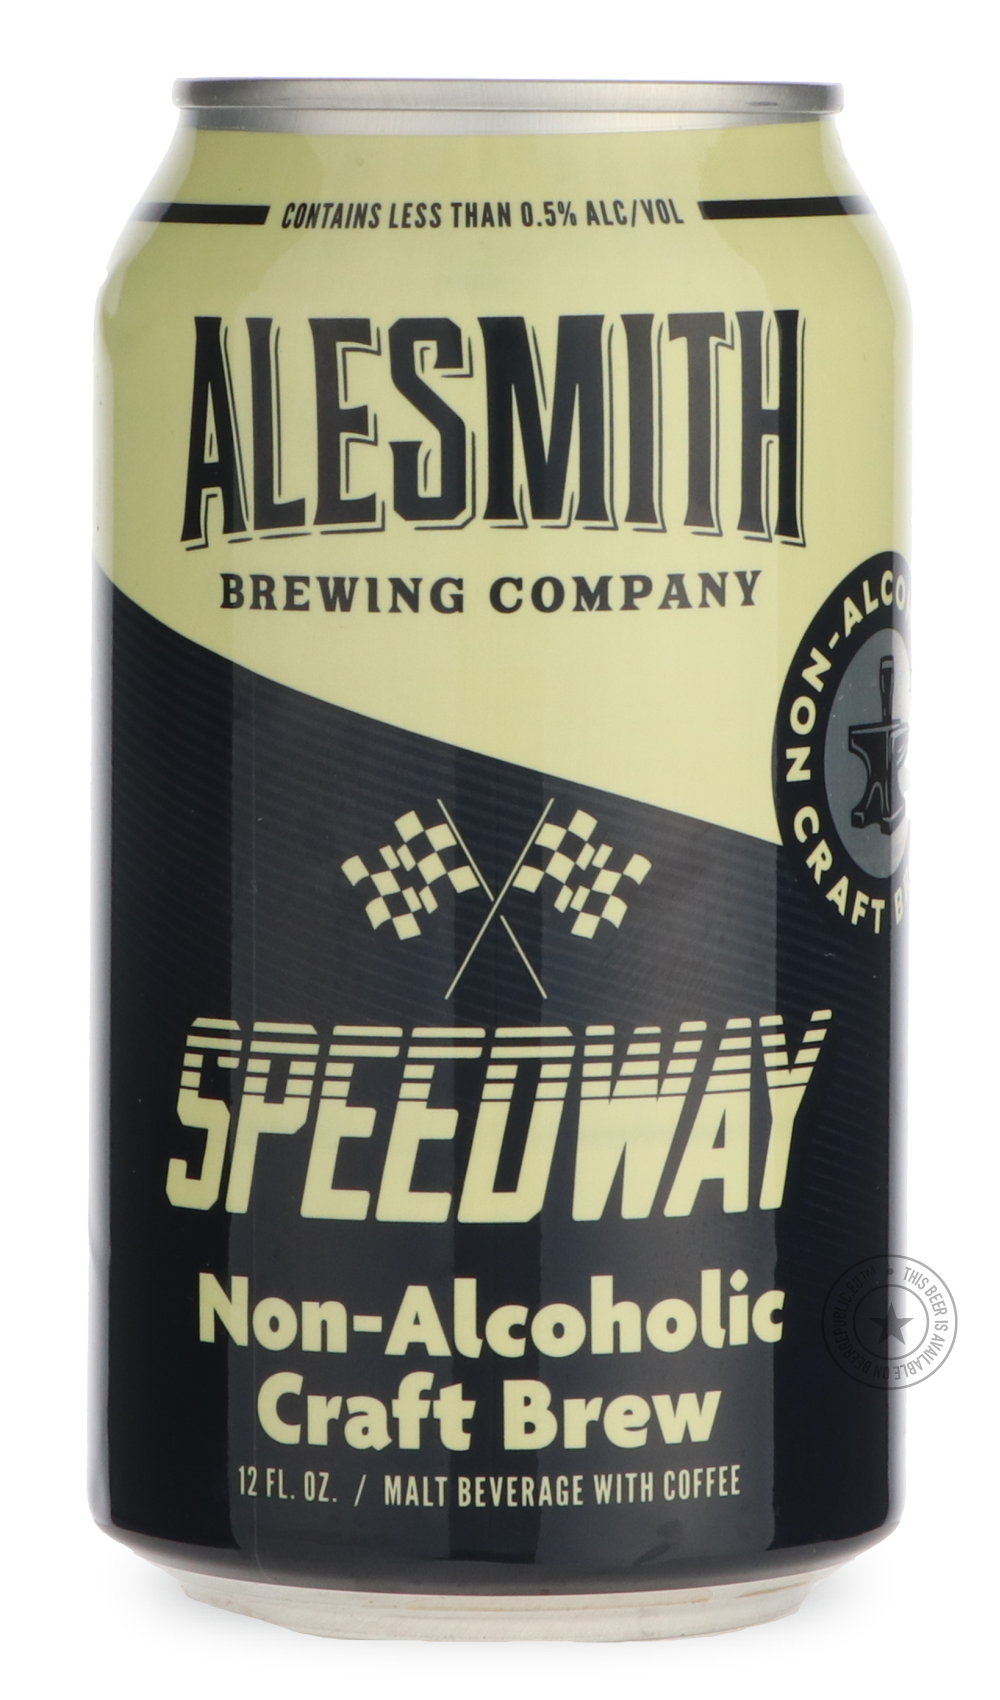 -AleSmith- Non-Alcoholic Speedway Stout-Specials- Only @ Beer Republic - The best online beer store for American & Canadian craft beer - Buy beer online from the USA and Canada - Bier online kopen - Amerikaans bier kopen - Craft beer store - Craft beer kopen - Amerikanisch bier kaufen - Bier online kaufen - Acheter biere online - IPA - Stout - Porter - New England IPA - Hazy IPA - Imperial Stout - Barrel Aged - Barrel Aged Imperial Stout - Brown - Dark beer - Blond - Blonde - Pilsner - Lager - Wheat - Weize